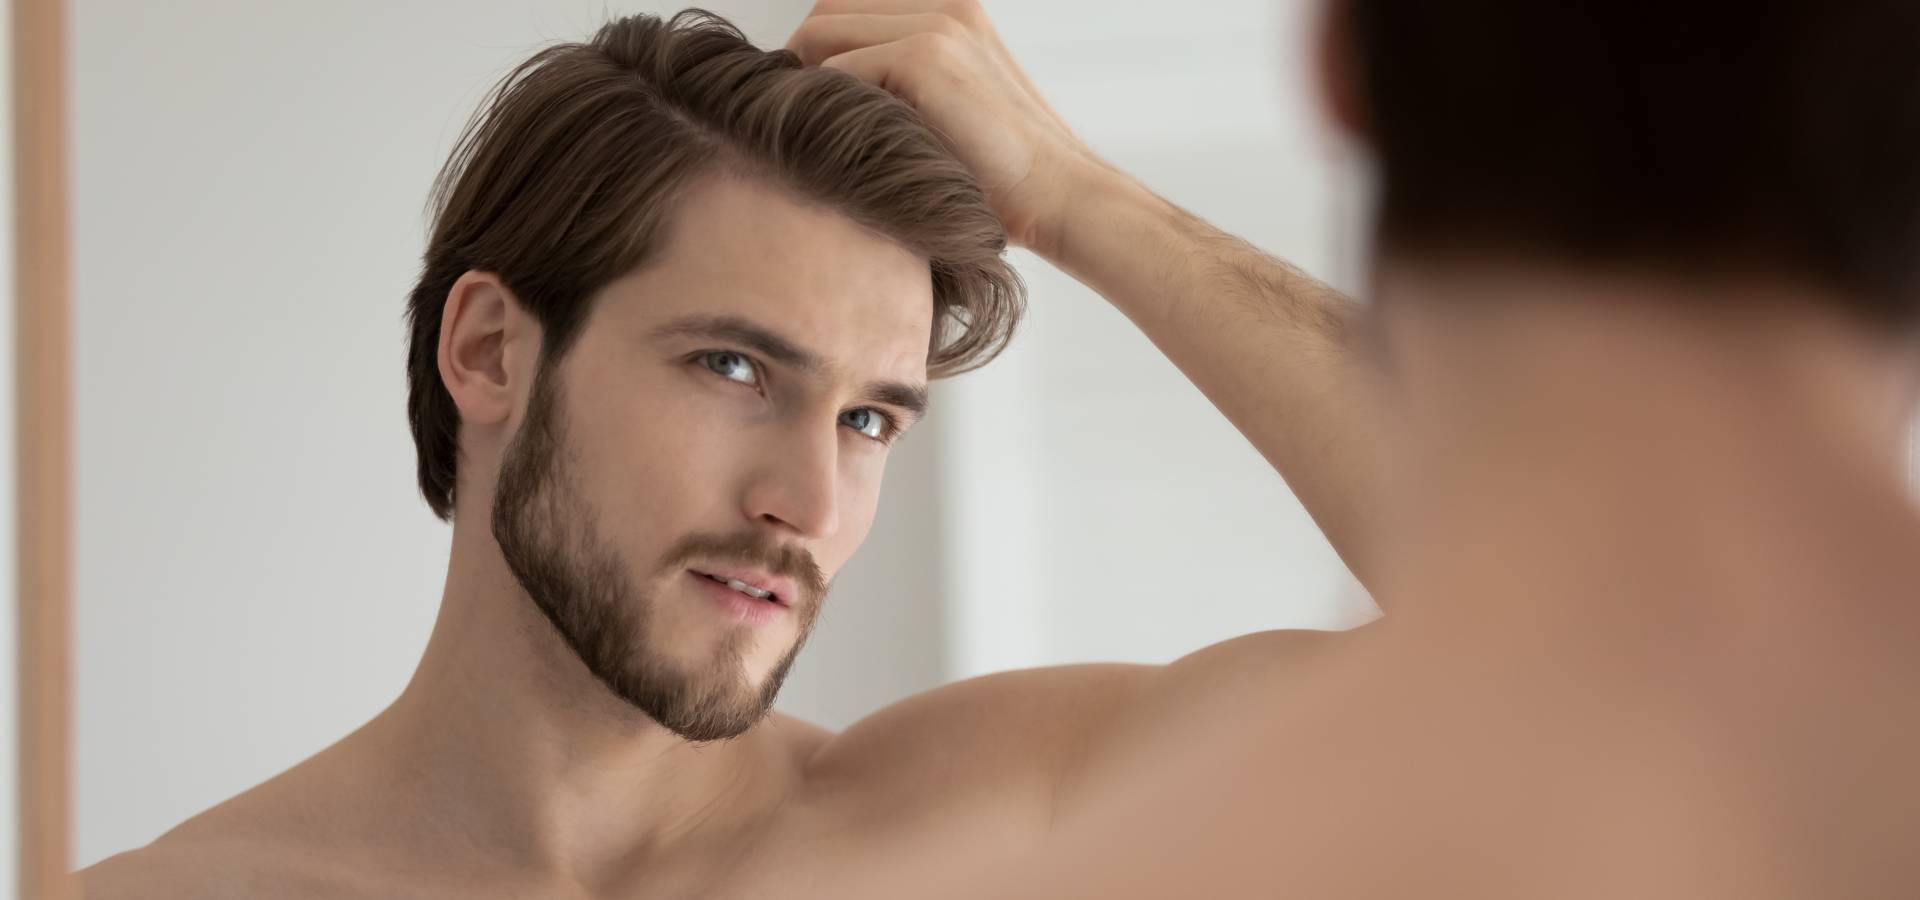 Man looks in mirror and touch hair.